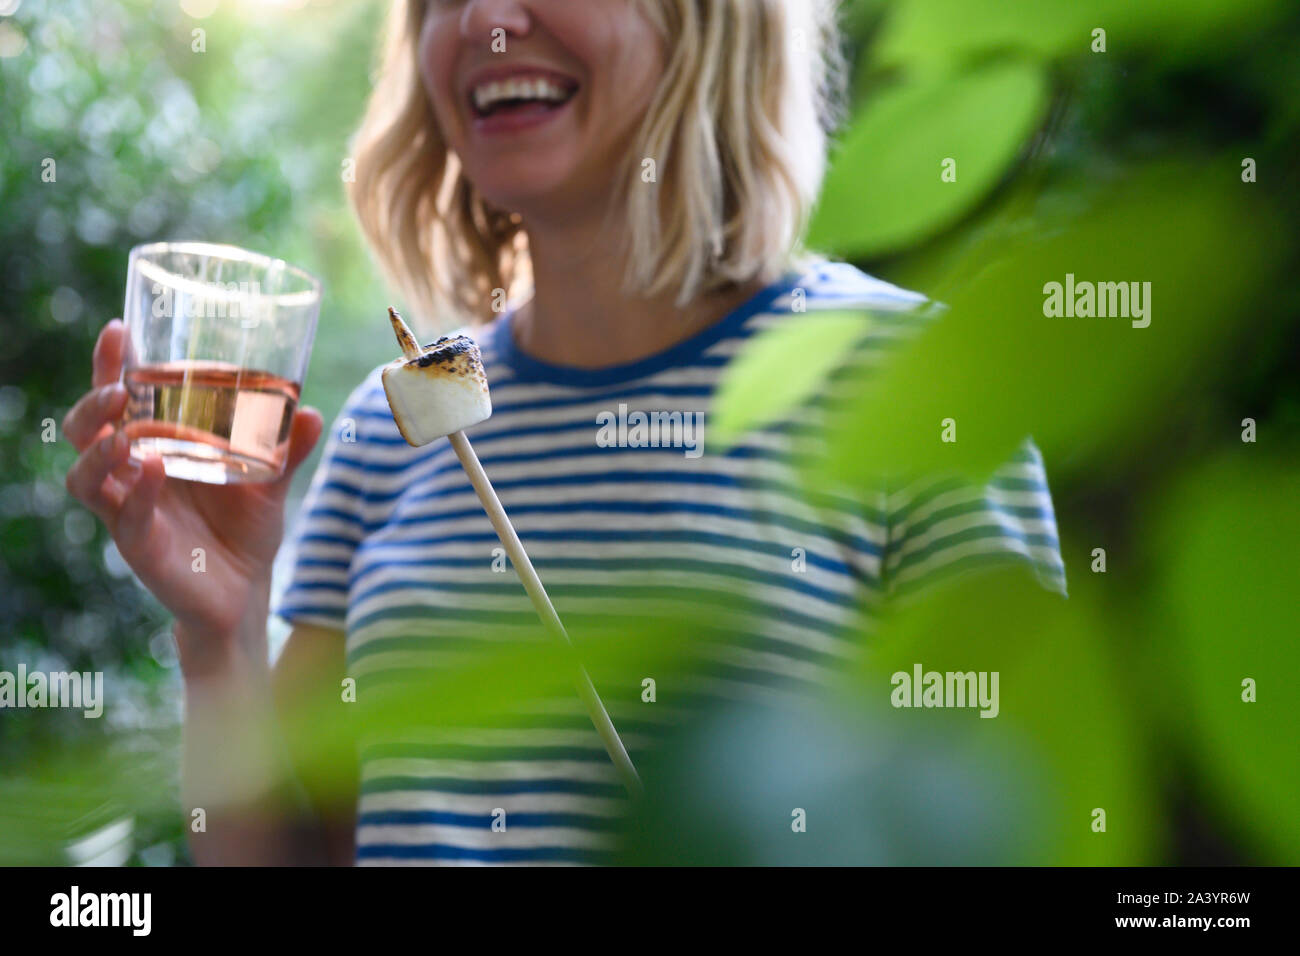 Smiling woman holding glass of wine and toasted marshmallow Stock Photo